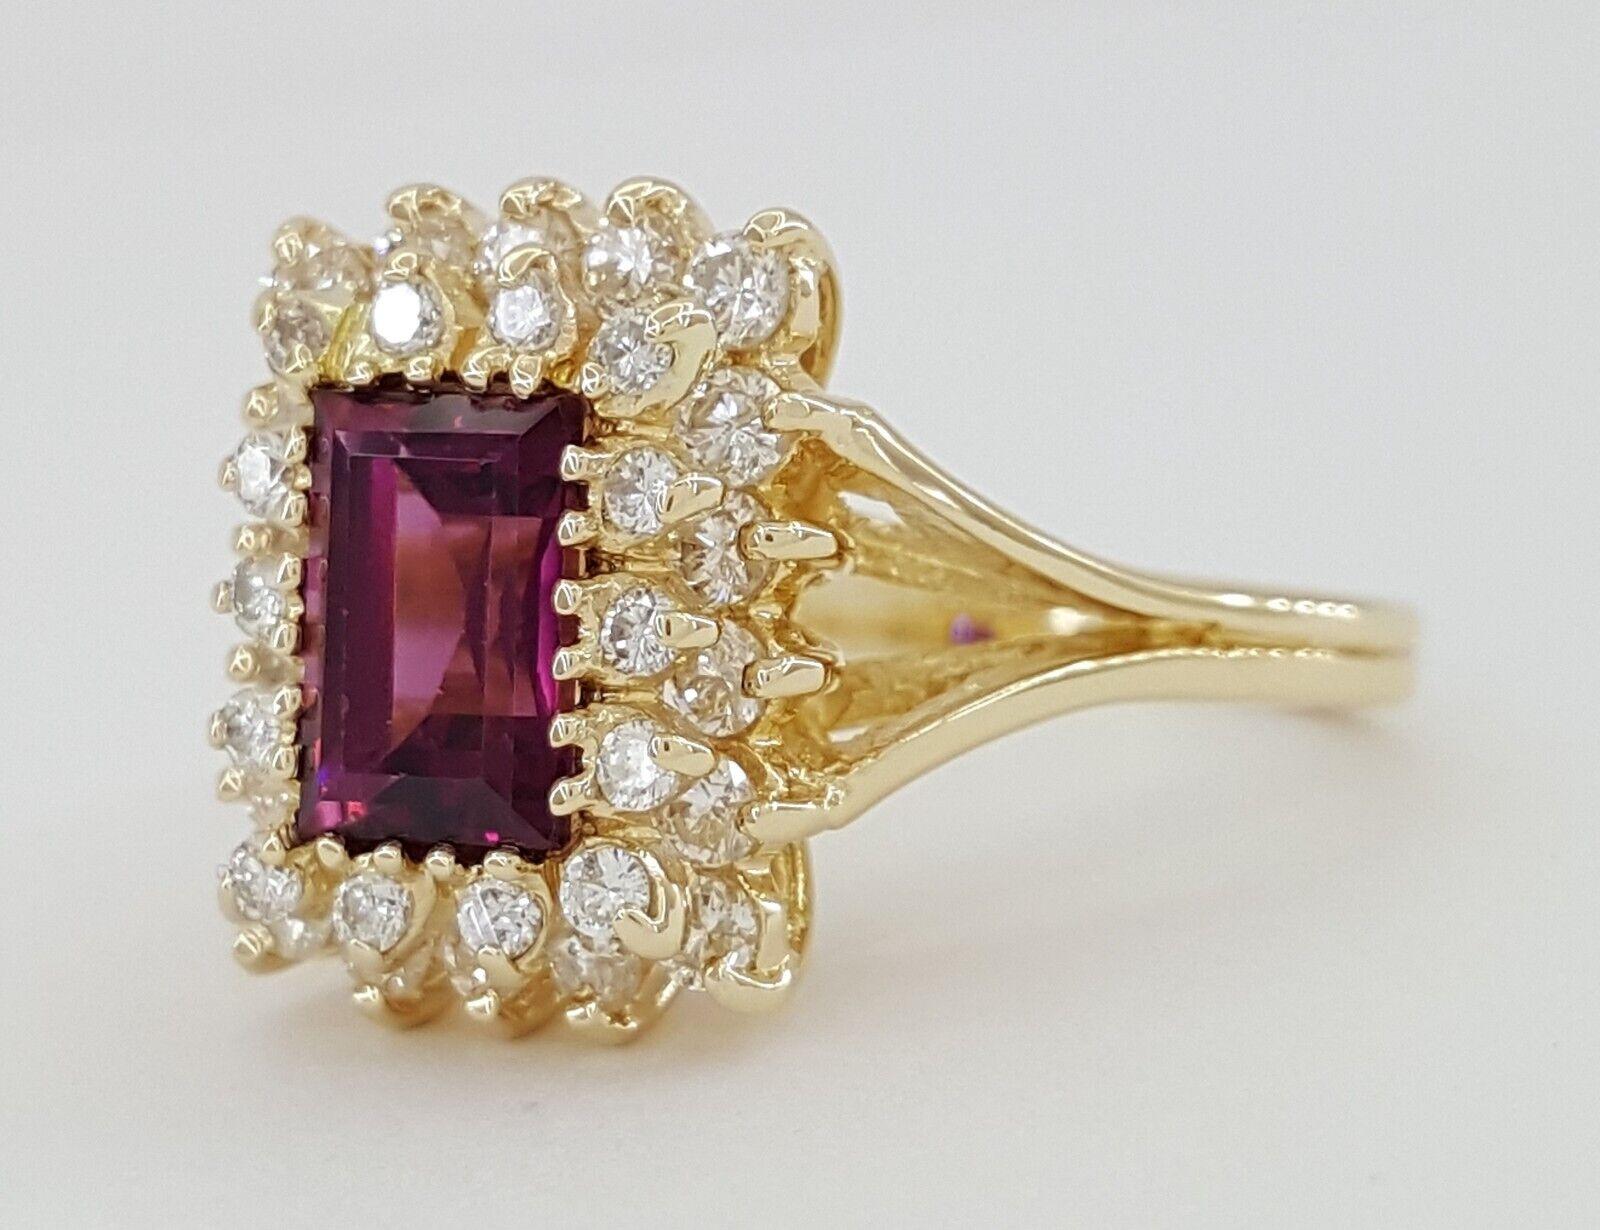 Contemporary 2.15 ct Total Weight Baguette Cut Garnet & Round Brilliant Cut Diamond Ring For Sale